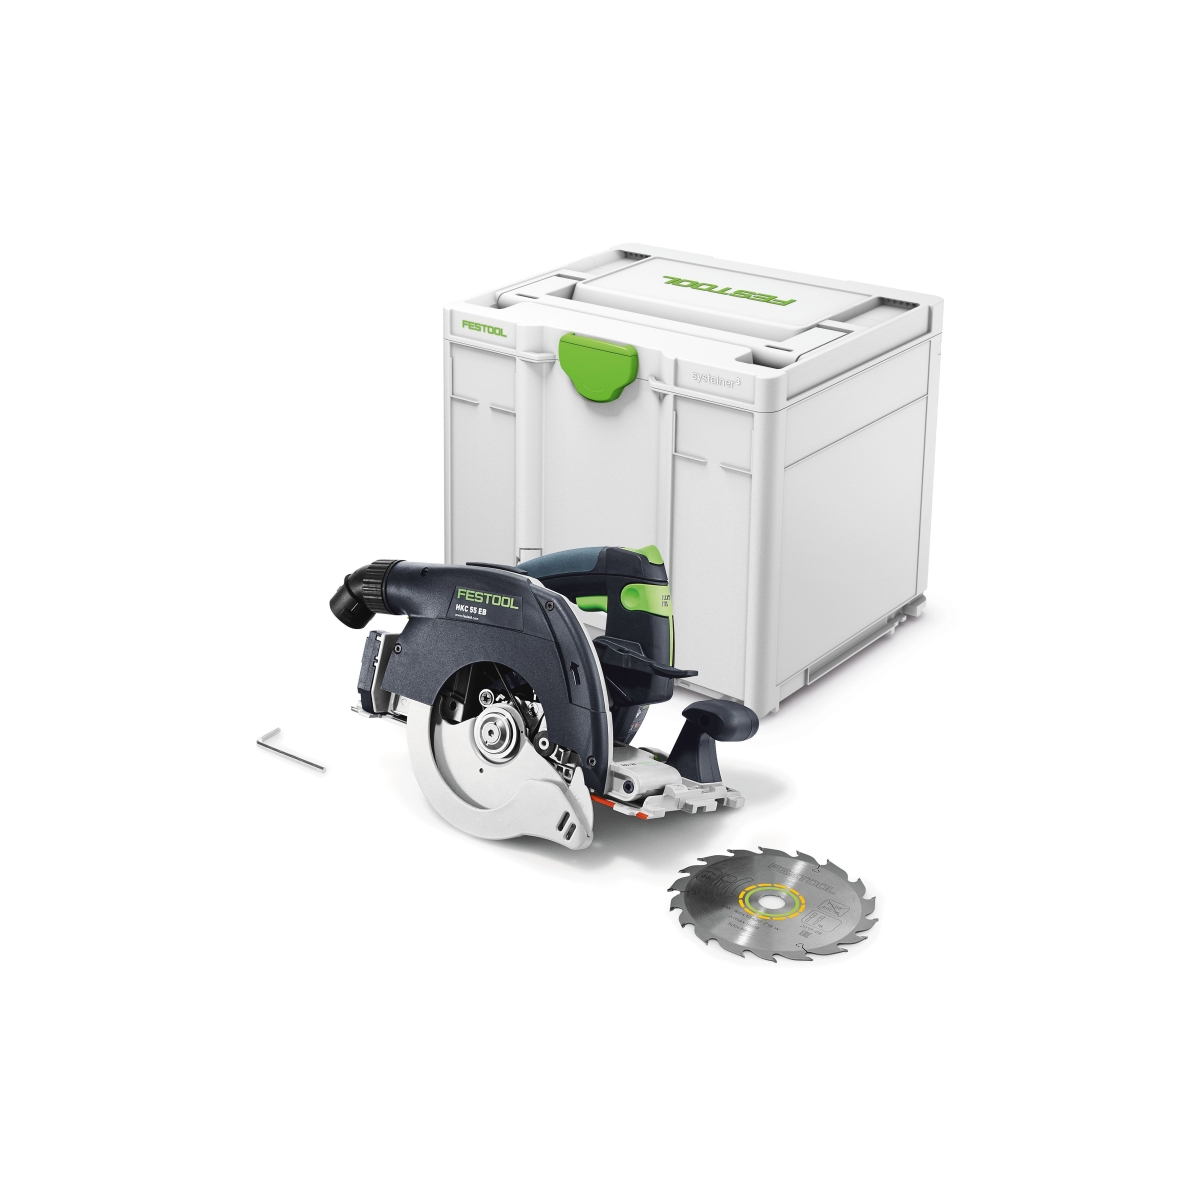 Festool HKC 55 18v Circular Saw Cordless in Systainer